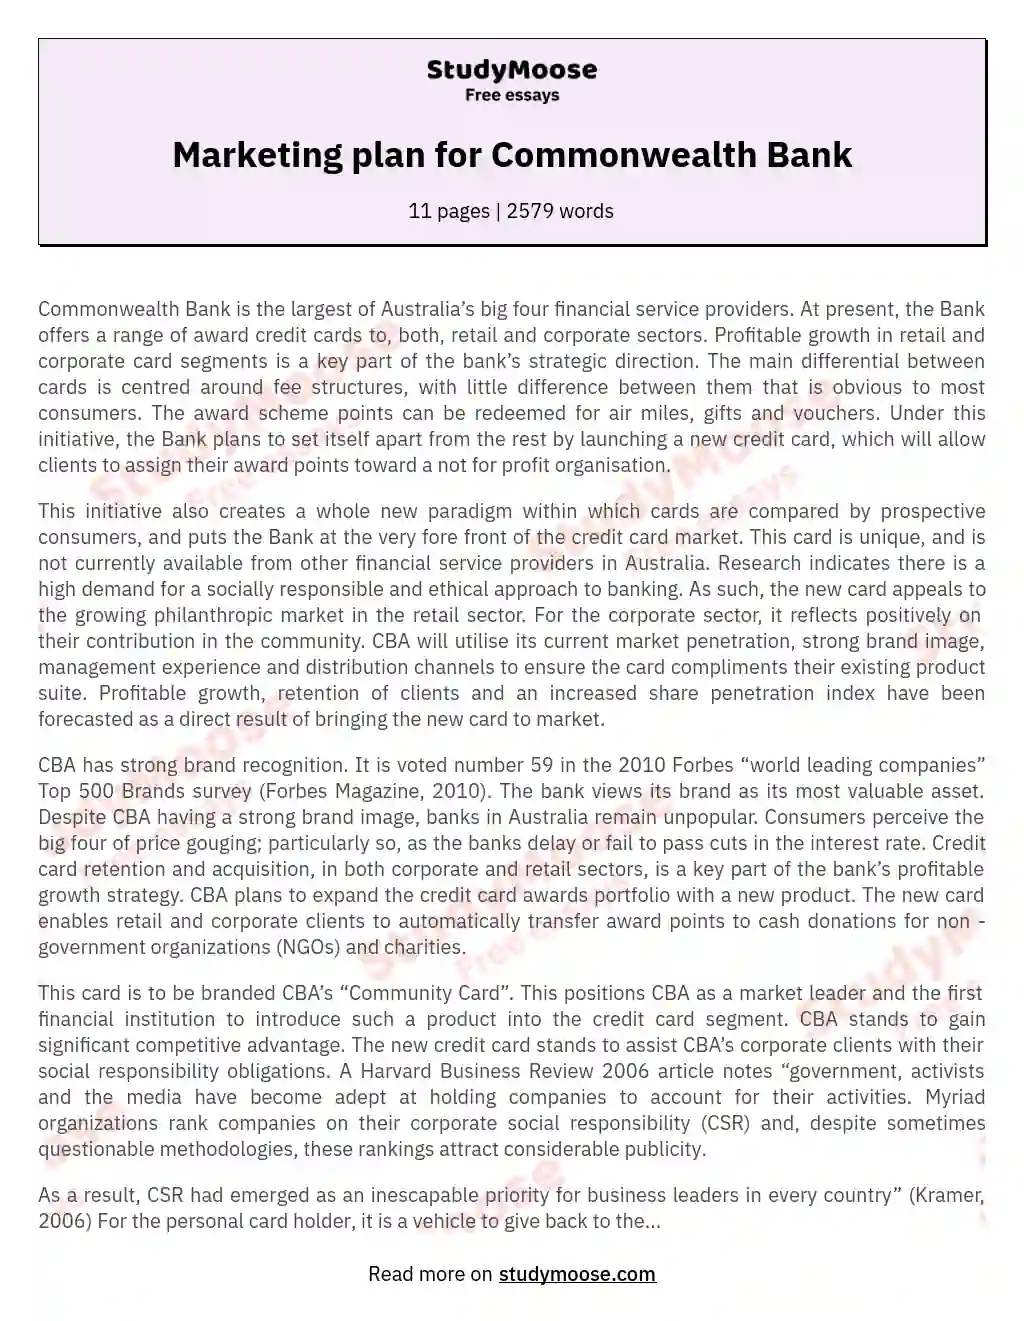 Marketing plan for Commonwealth Bank essay